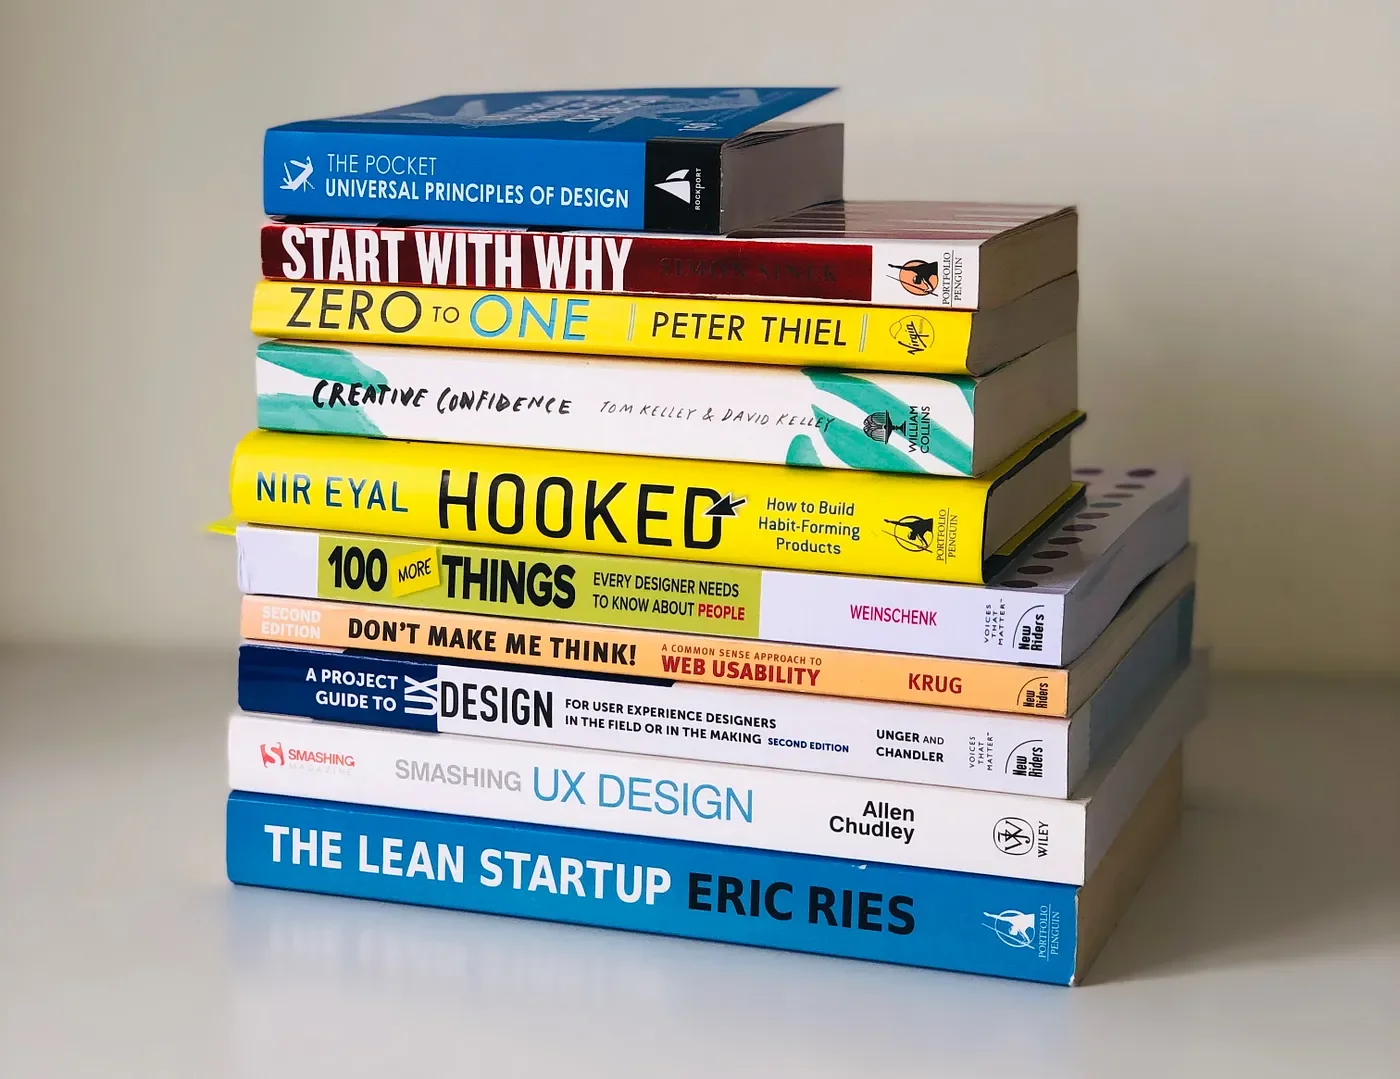 33 Inspiring Design Books to Add to Your Cart Now